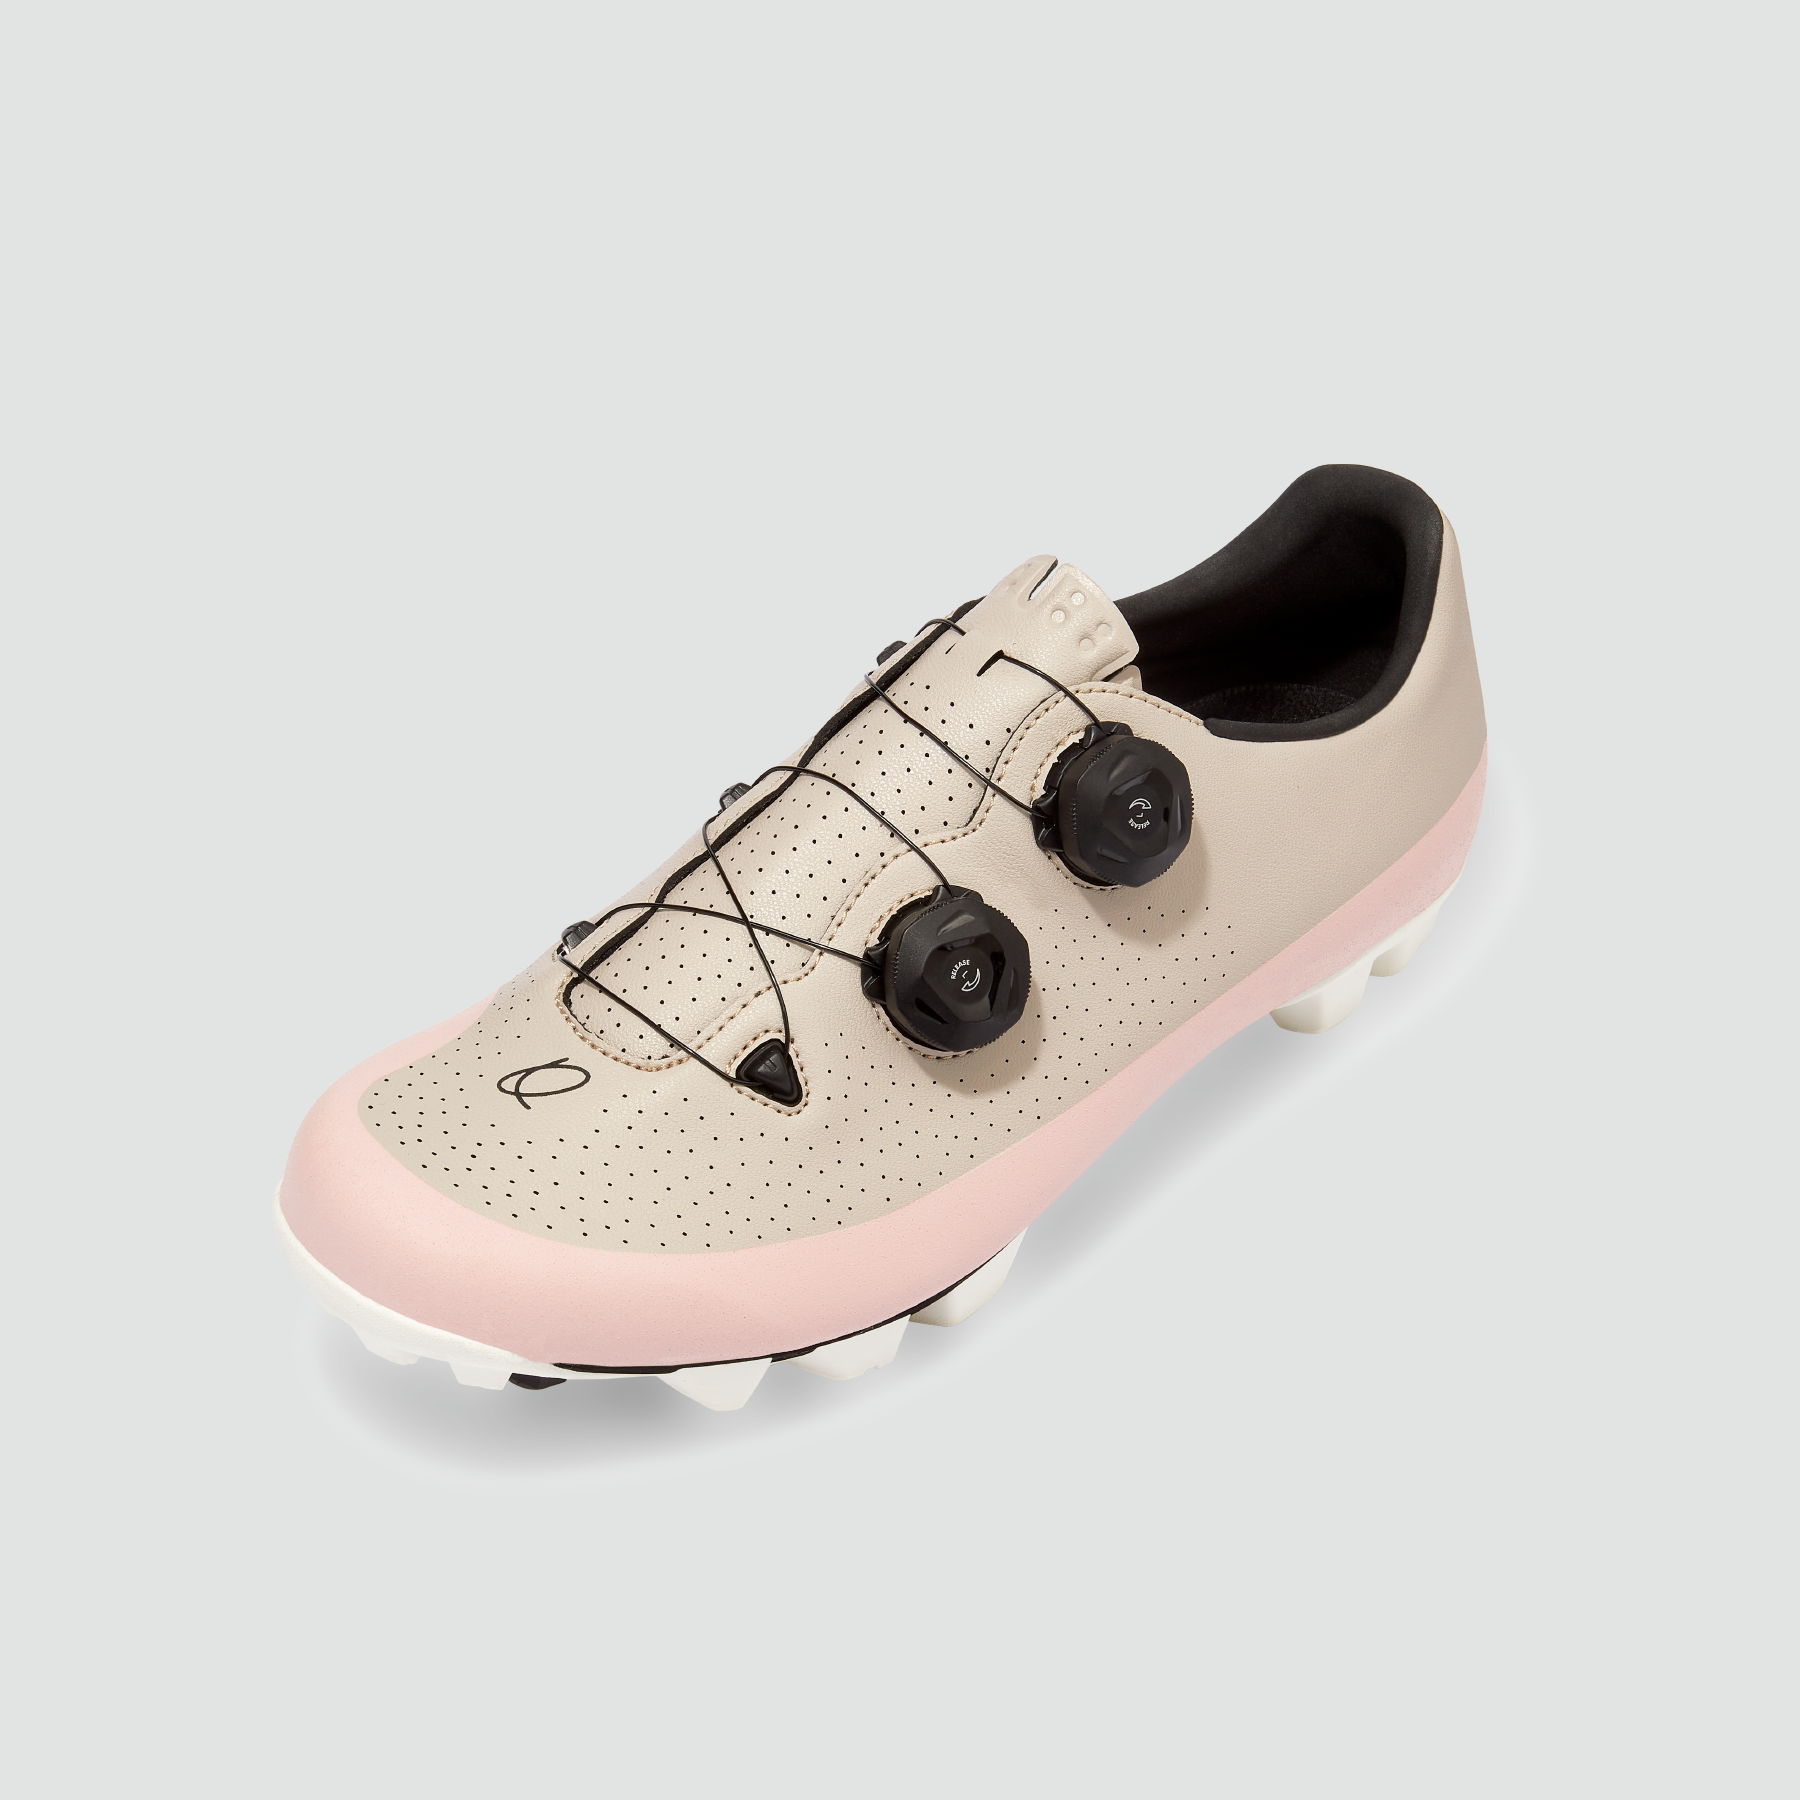 GT XC Shoes - Dusty Pink